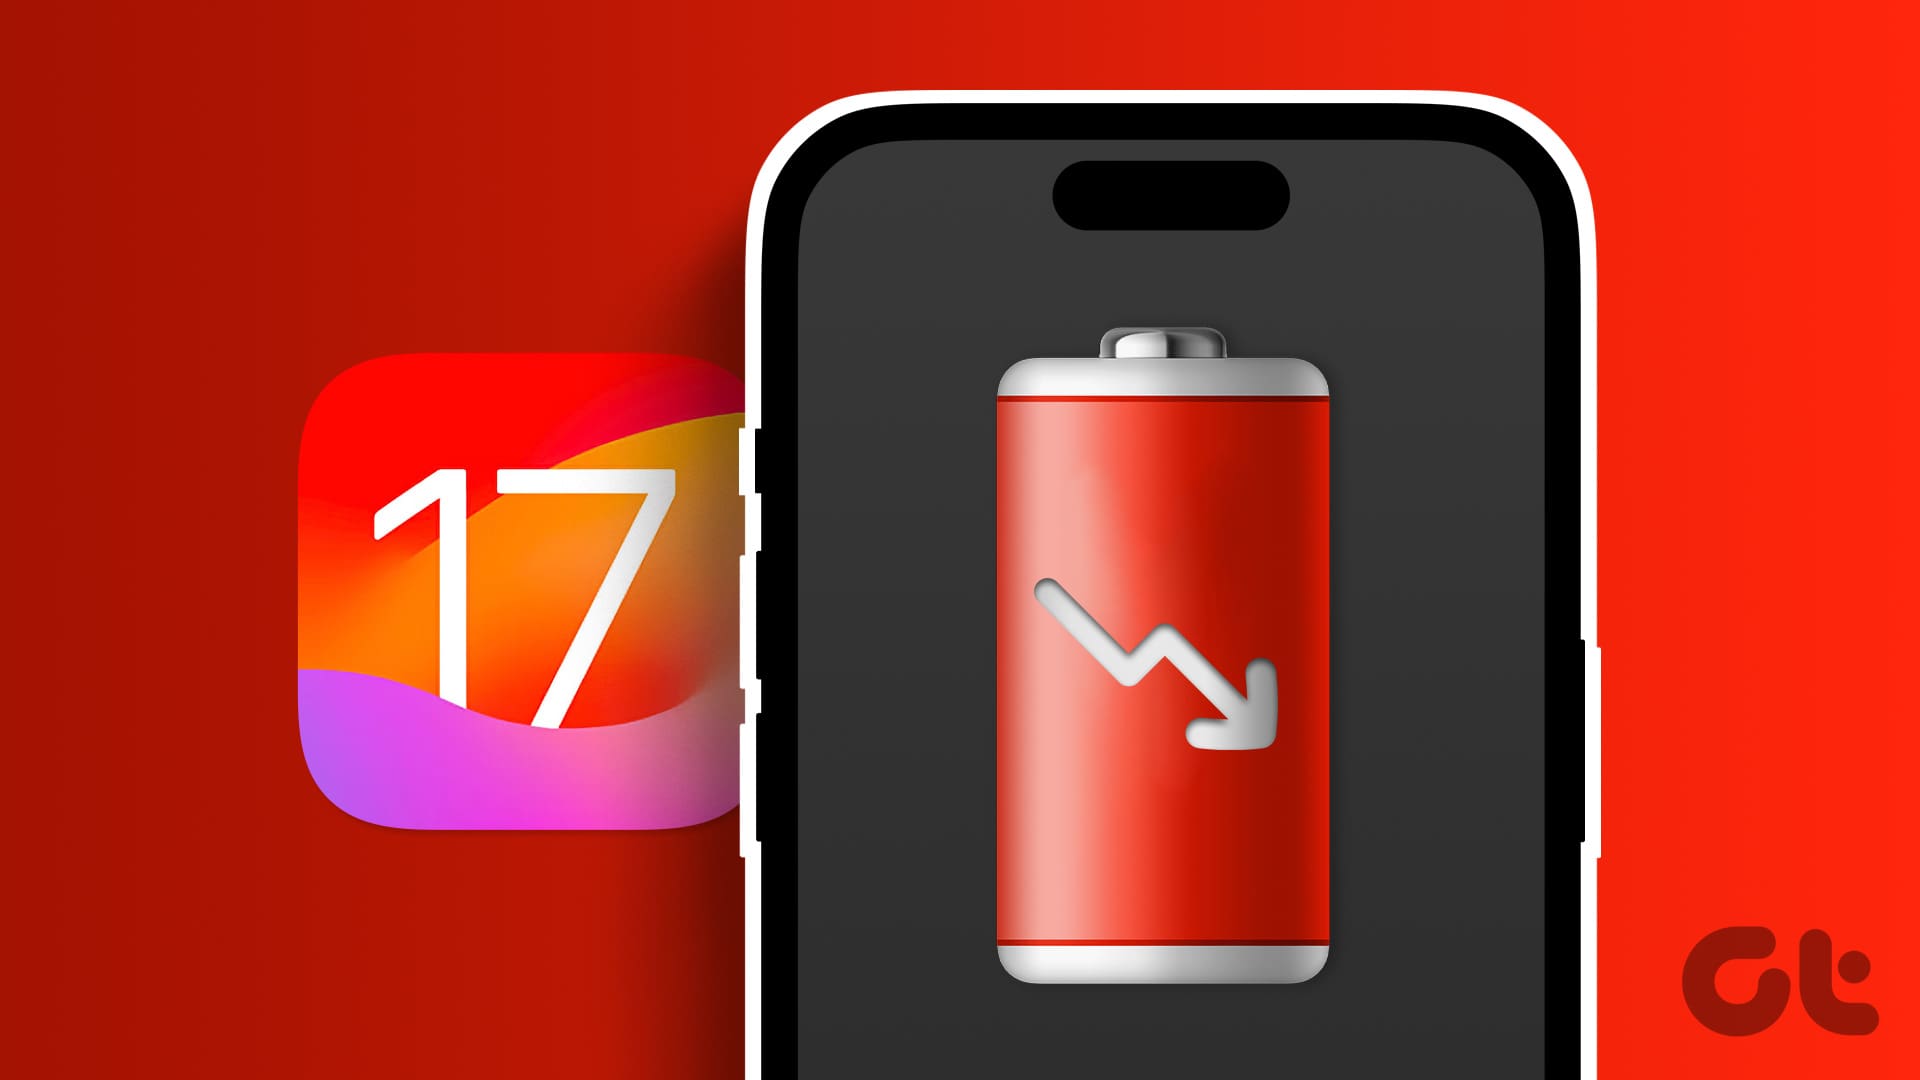 How to Fix iOS 17 Battery Drain Issue on iPhone